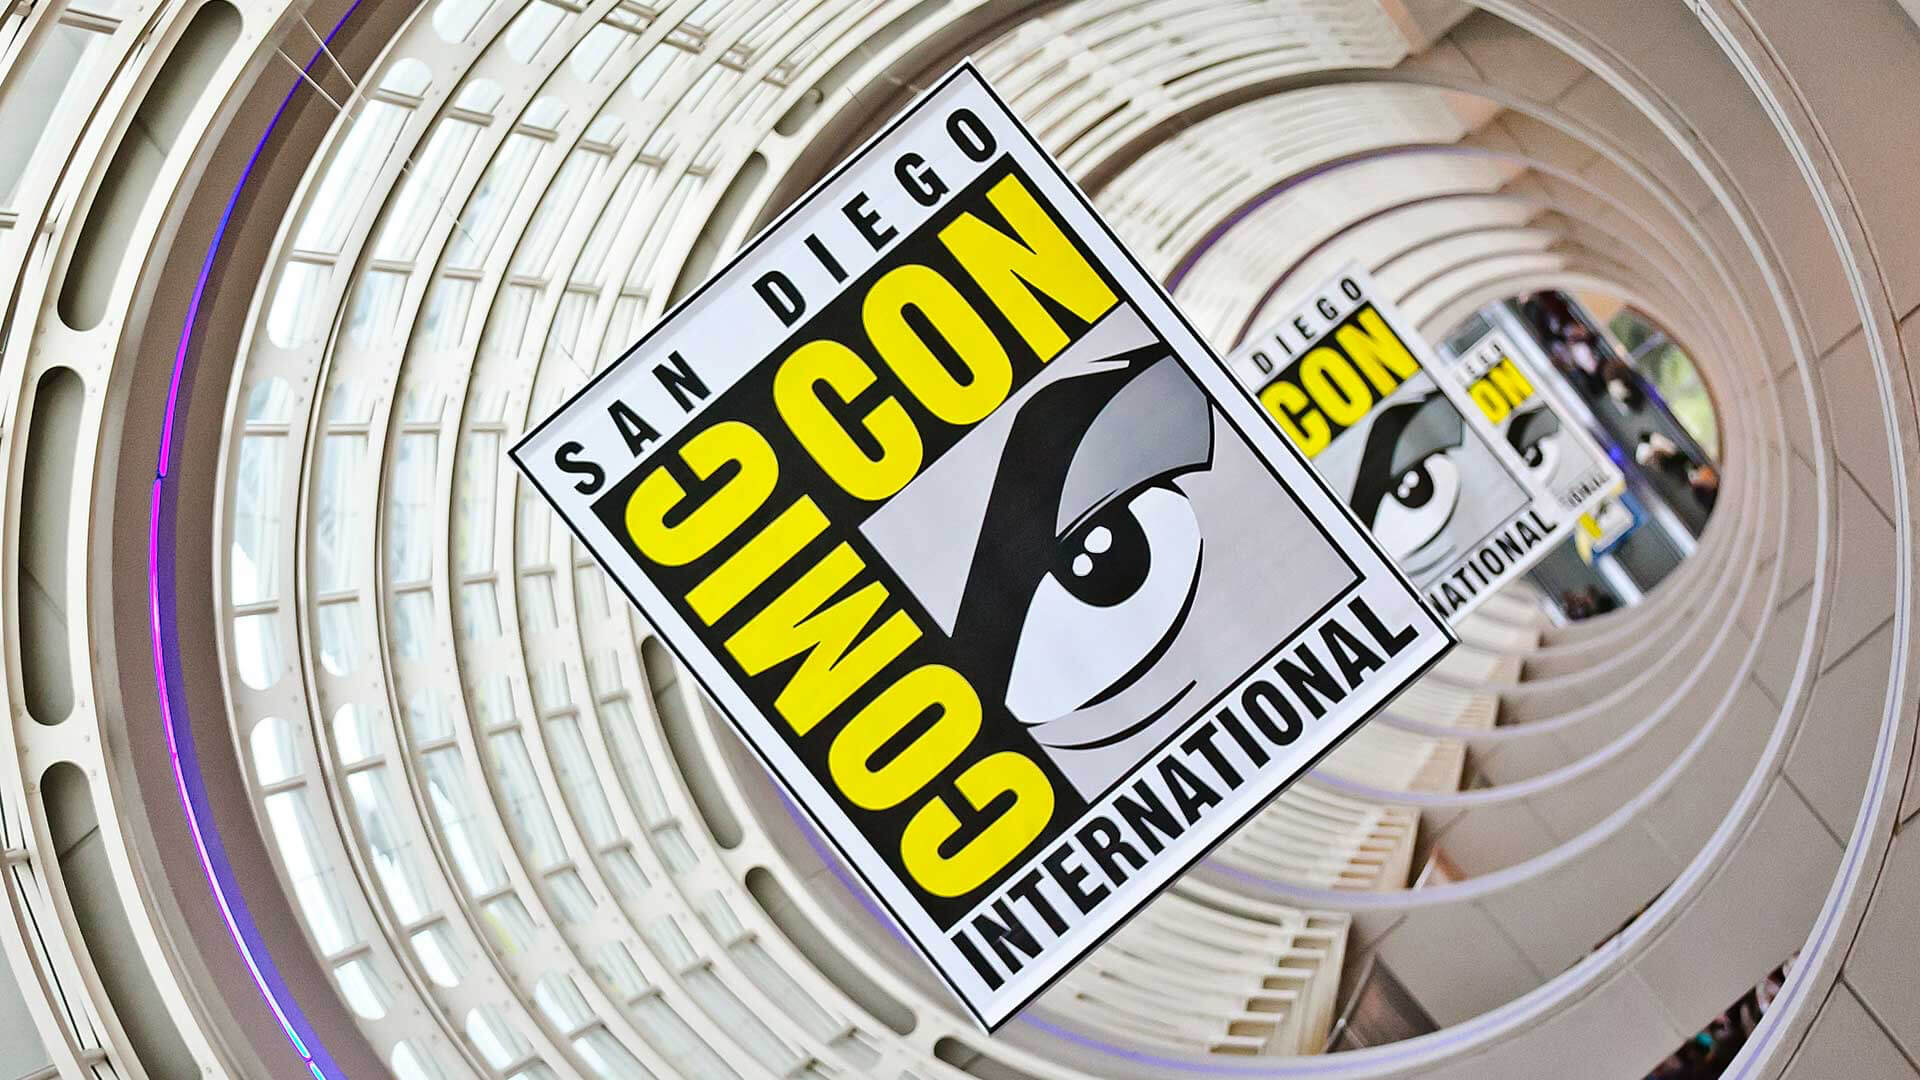 San Diego Comic-Con is in crisis, as it has after Marvel Studios, Lucasfilm, Netflix, Sony Pictures, HBO and other big studios may skip the biggest fan festival